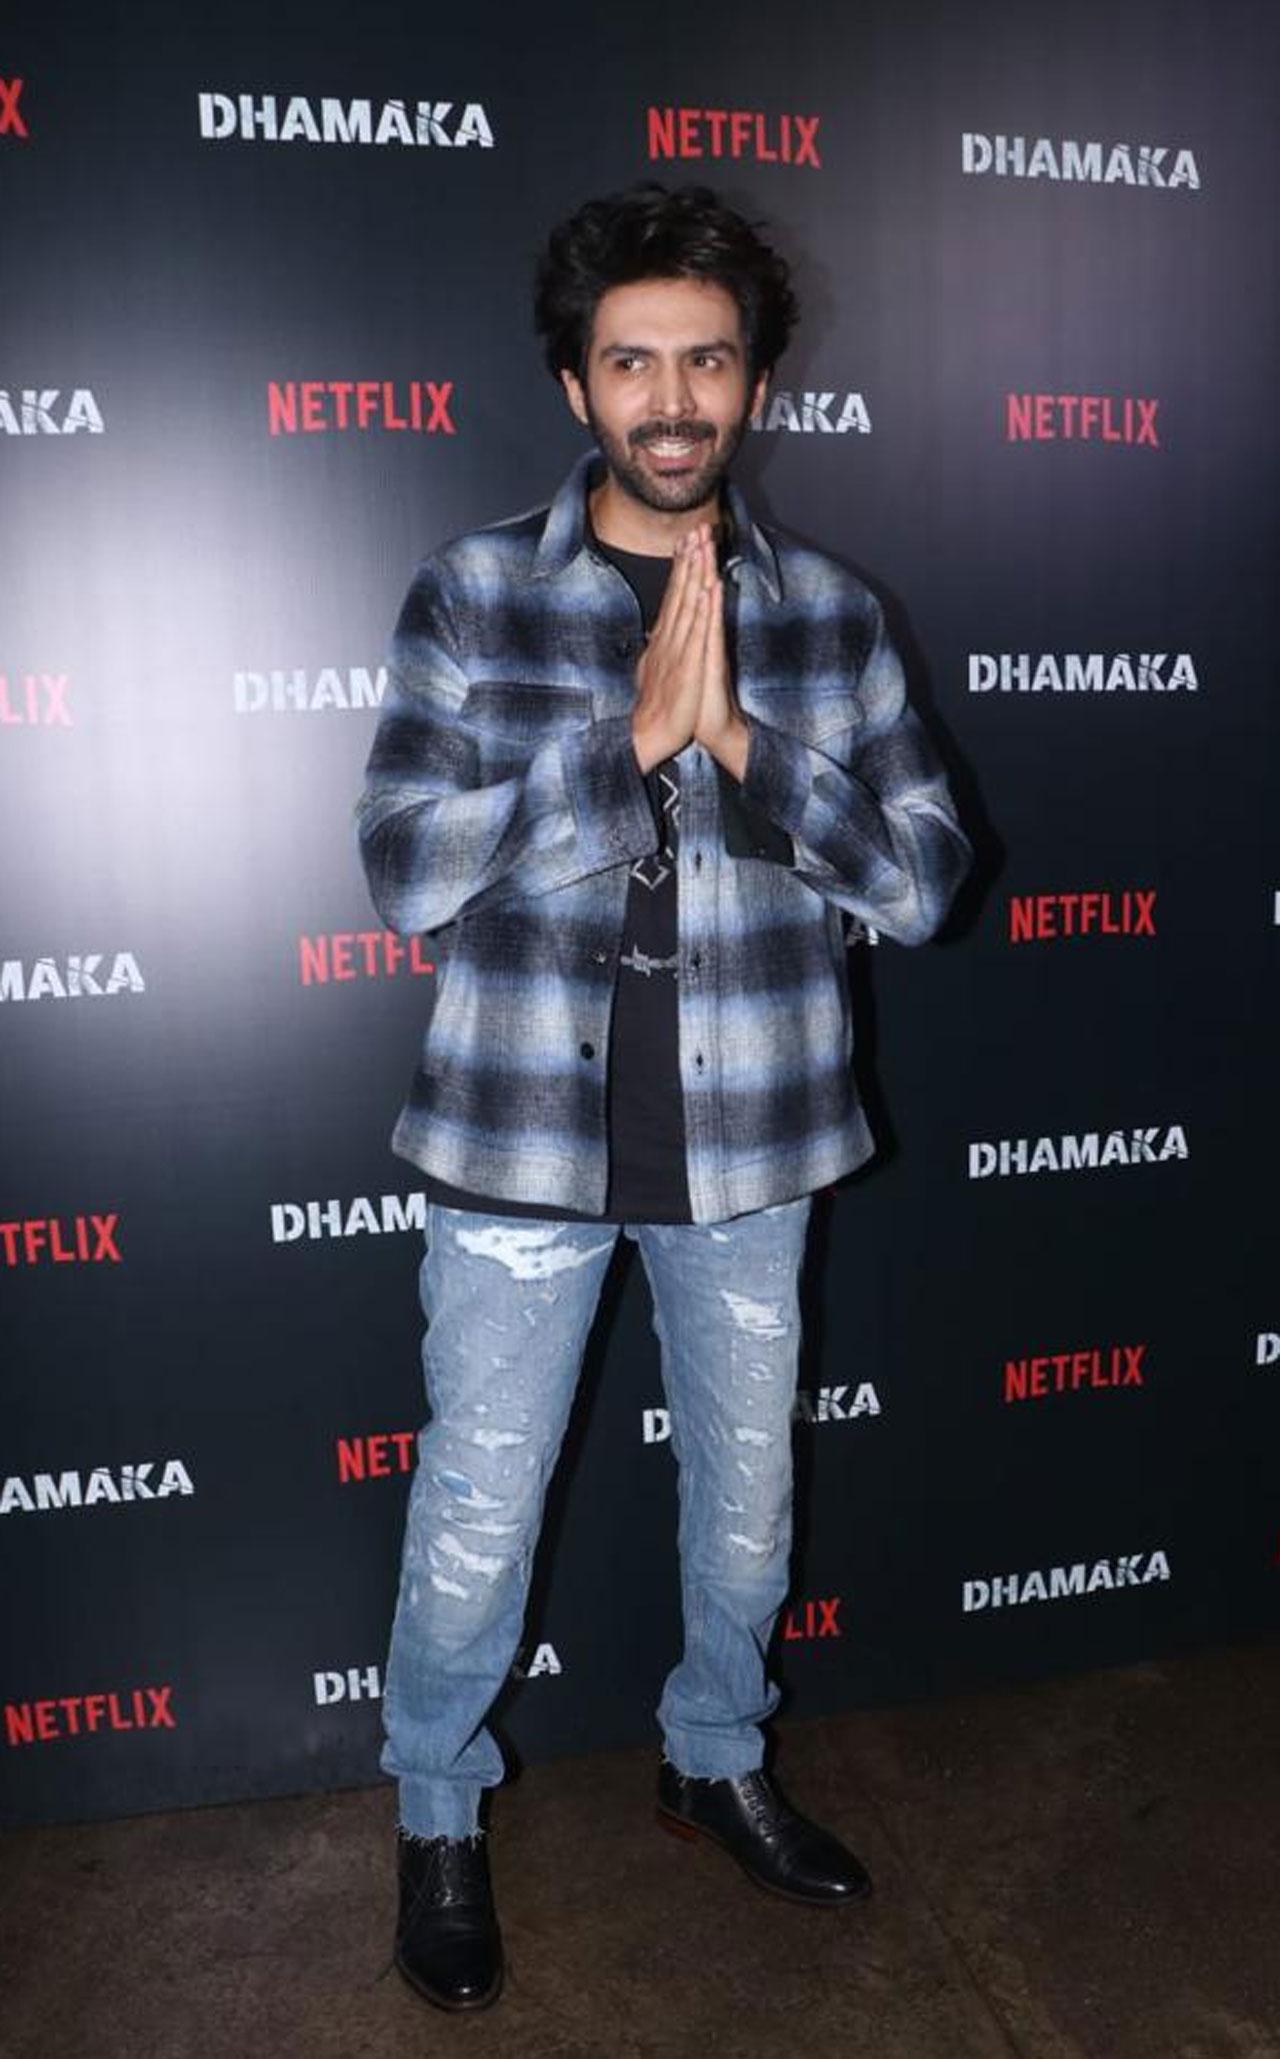 Kartik Aaryan is gearing up for Ram Madhvani’s Dhamaka that will directly stream on Netflix from November 19 onwards. The actor was spotted at the film screening in a casual yet cool avatar. Let’s see what kind of a response this newsroom thriller receives from the critics and audiences.
 